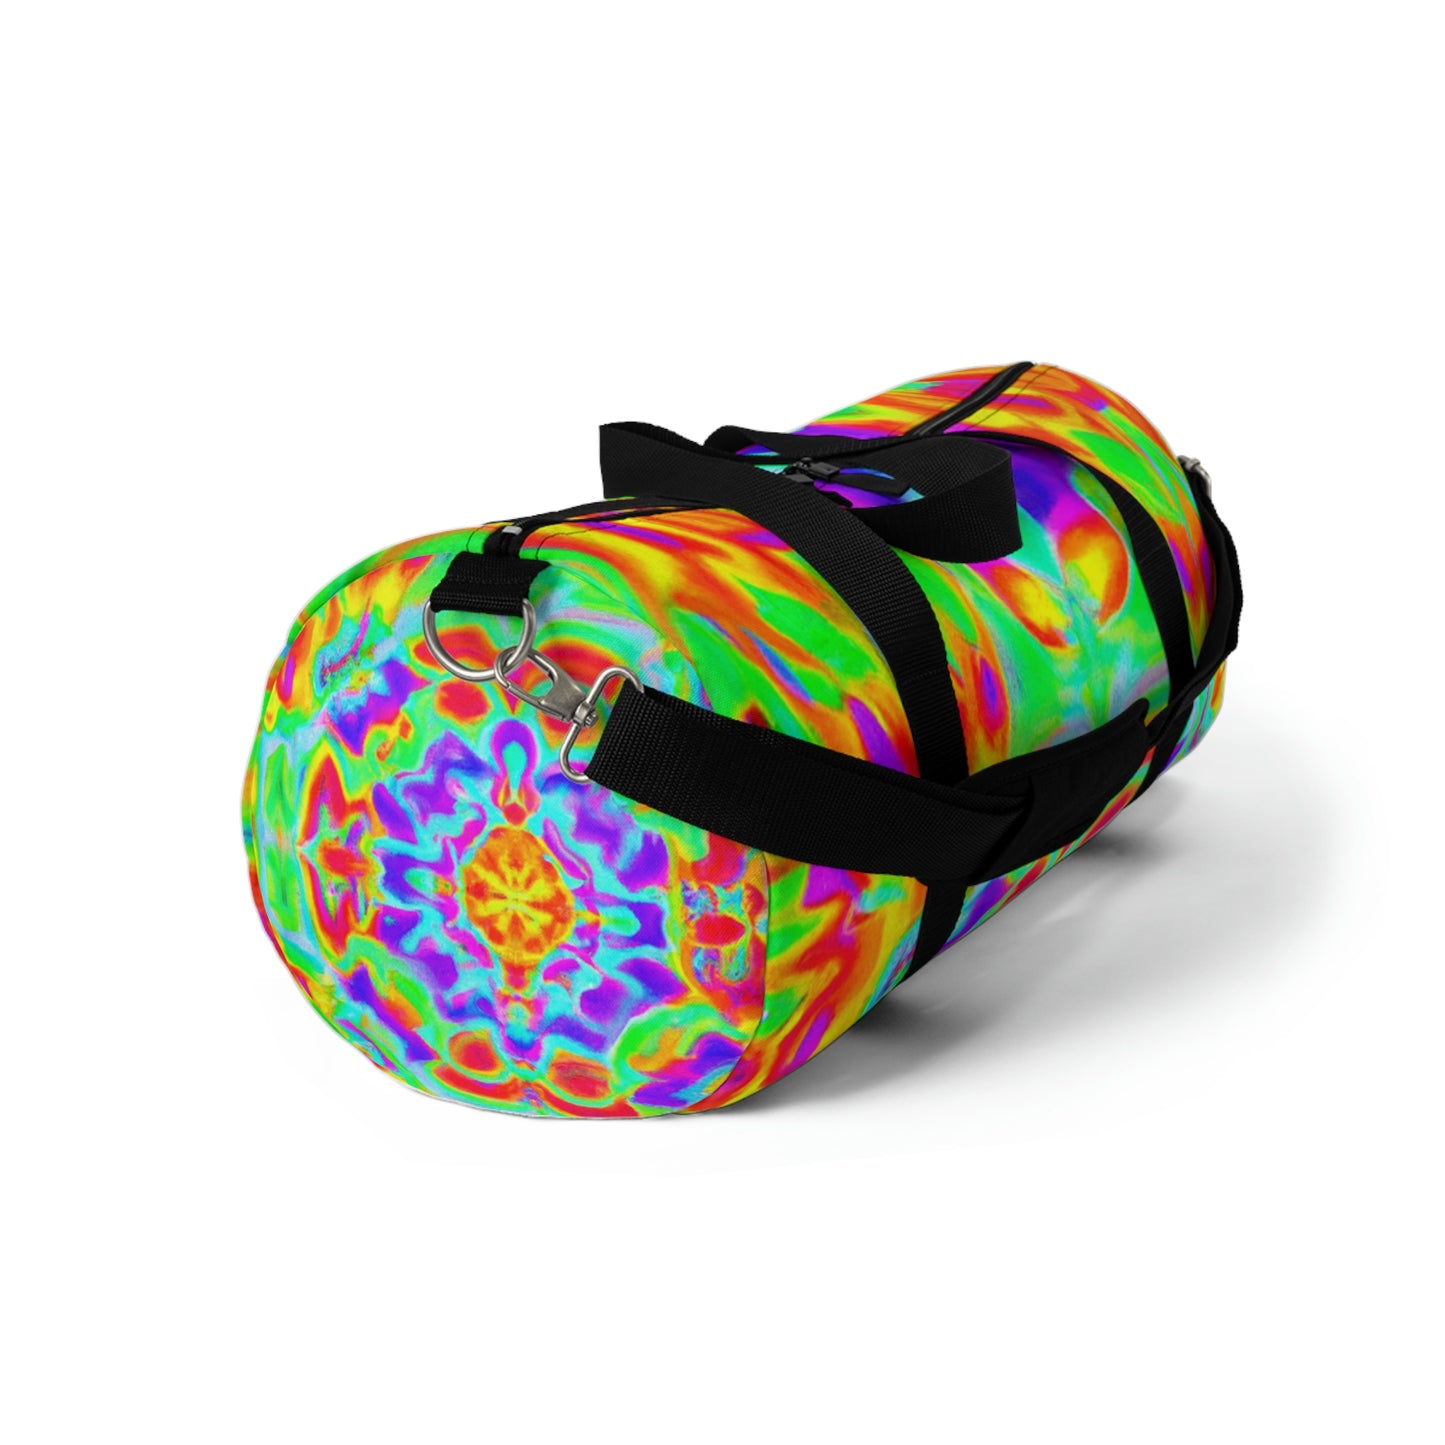 Sachi Couture - Psychedelic Duffel Bag